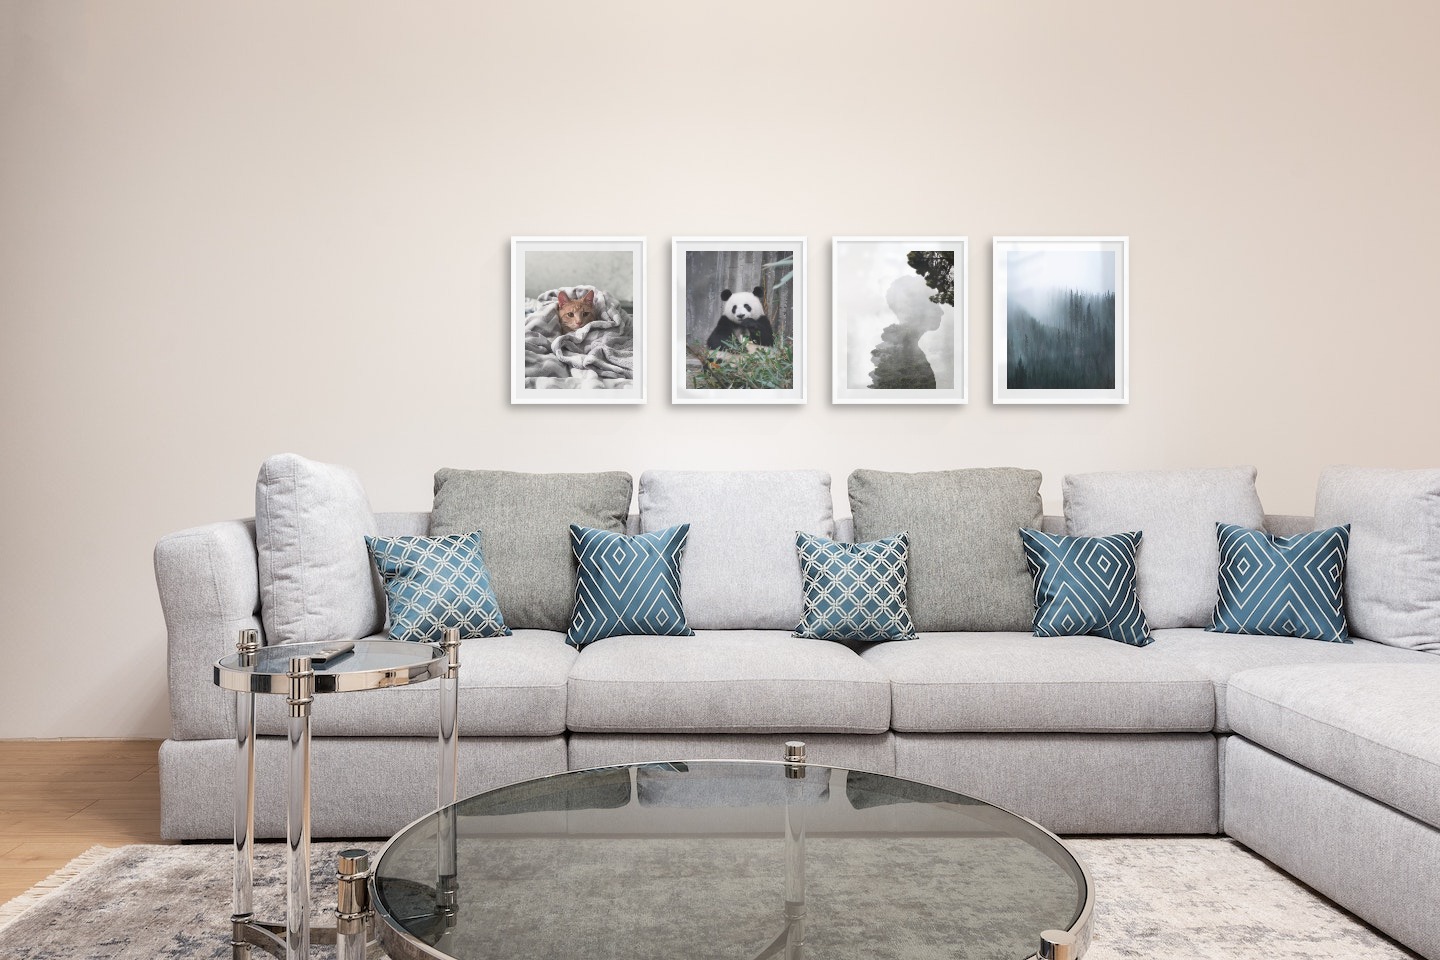 Gallery wall with picture frames in white in sizes 40x50 with prints "Cat in felt", "Panda", "Silhouette and tree" and "Foggy forest"